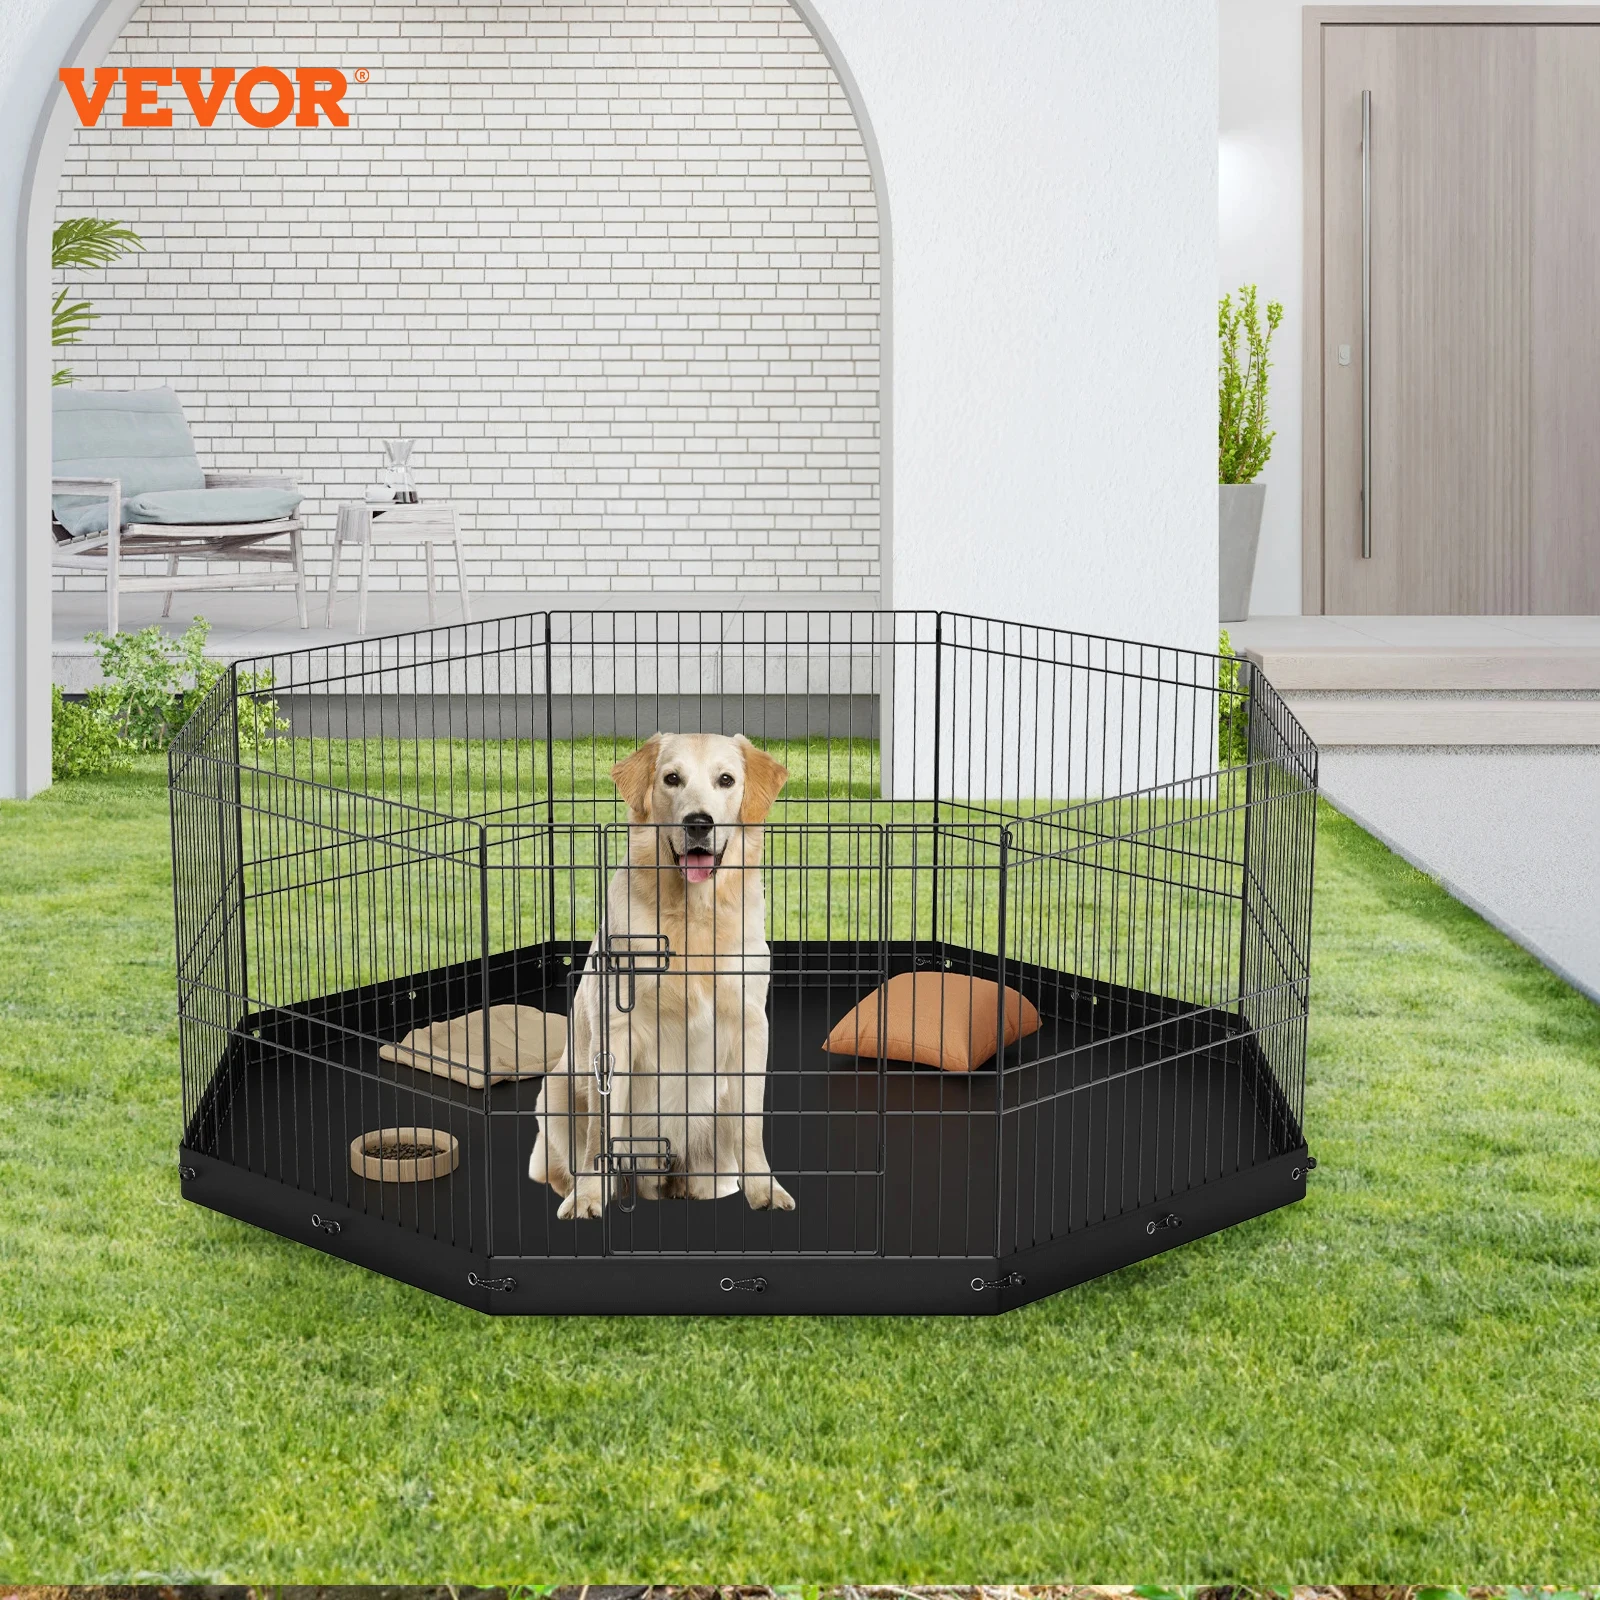 

VEVOR Dog Playpen Foldable Metal Dog Pen with Bottom Pad Pet Fence Puppy Crate Kennel for Indoor Outdoor Camping Yard Pets Pen